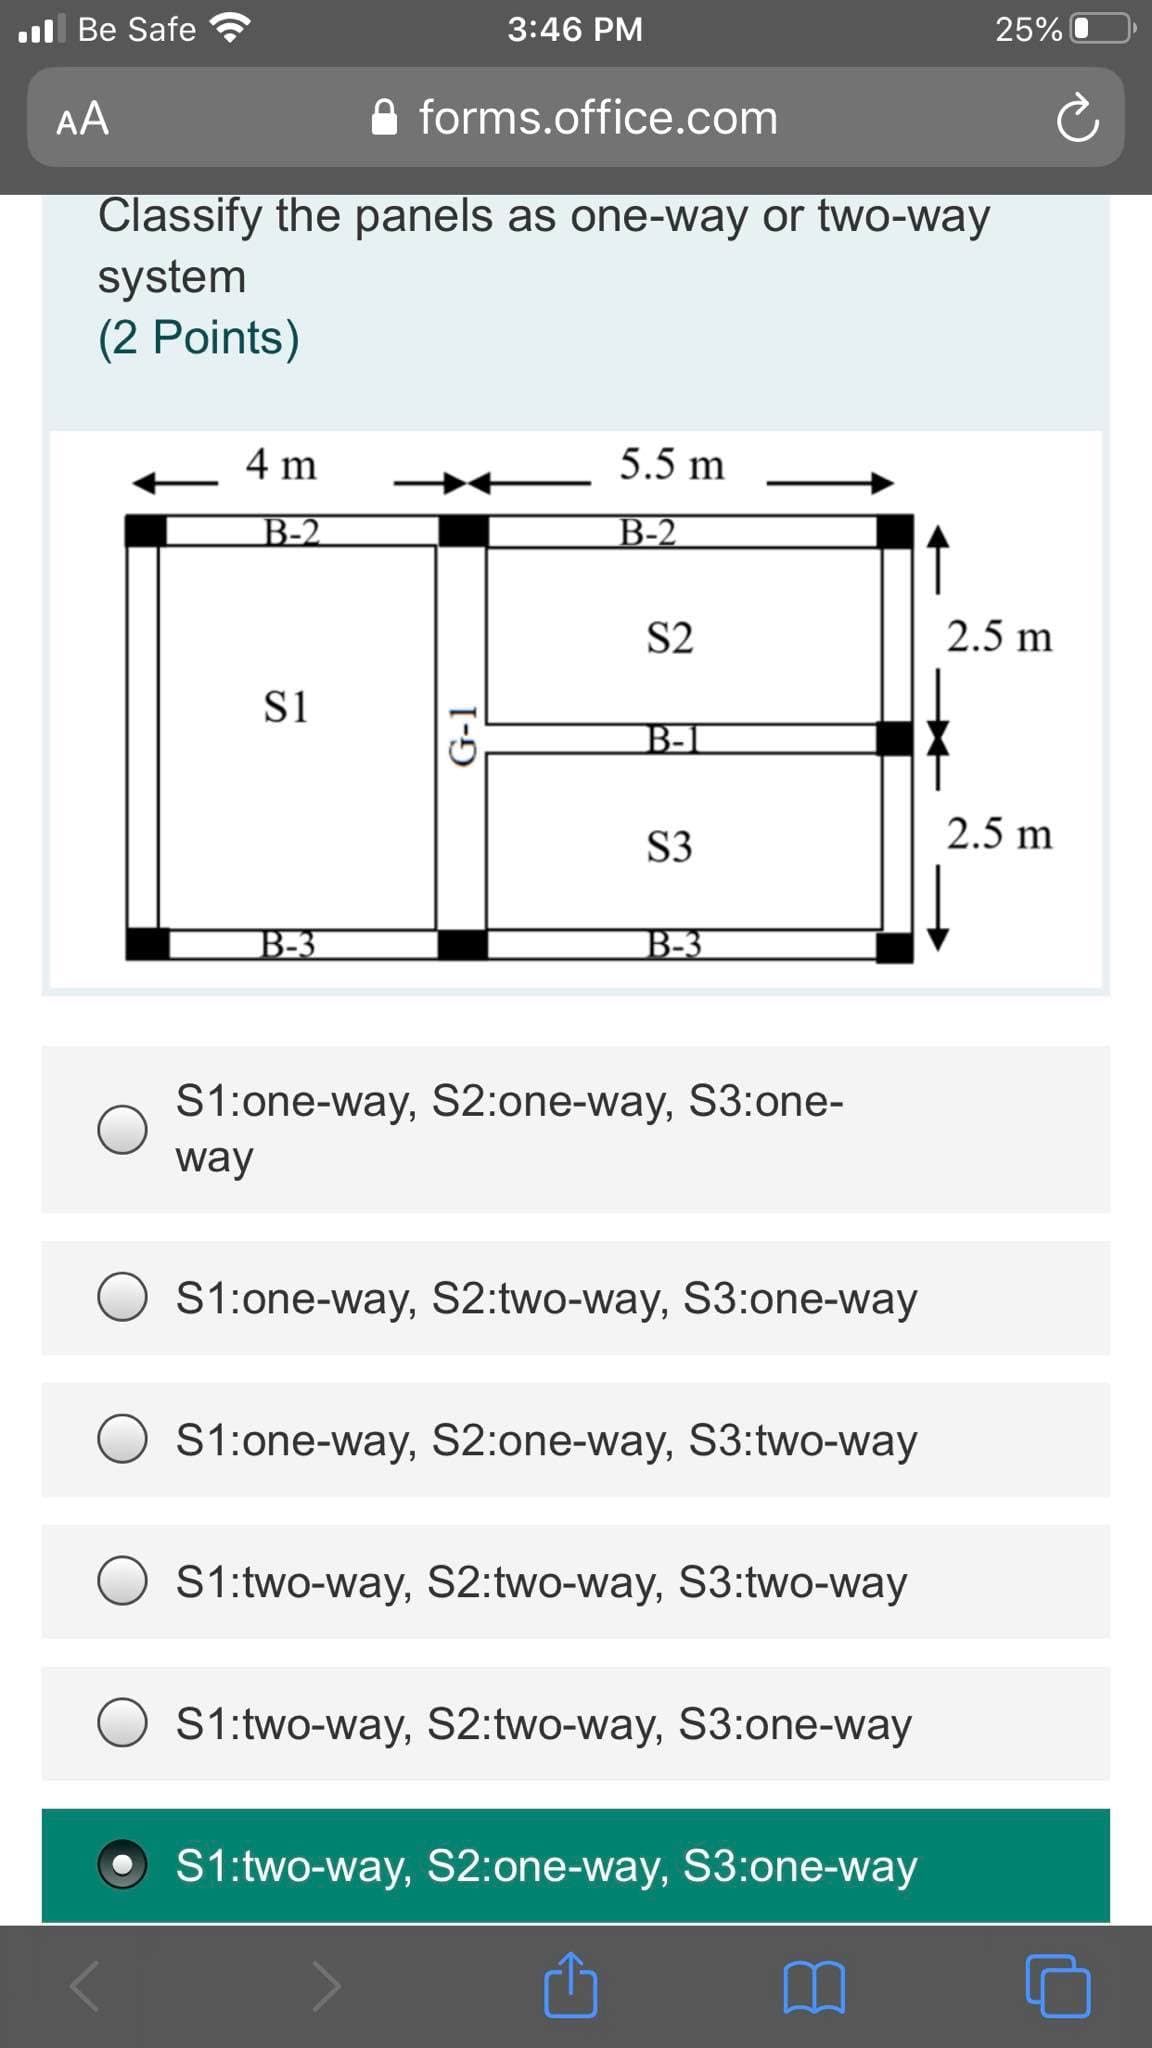 Classify the panels as one-way or two-way
system
(2 Points)
4 m
5.5 m
B-2
B-2
S2
2.5 m
S1
B-1
S3
2.5 m
B-3
B-3
S1:one-way, S2:one-way, S3:one-
way
S1:one-way, S2:two-way, S3:one-way
S1:one-way, S2:one-way, S3:two-way
S1:two-way, S2:two-way, S3:two-way
S1:two-way, S2:two-way, S3:one-way
S1:two-way, S2:one-way, S3:one-way
G-1
